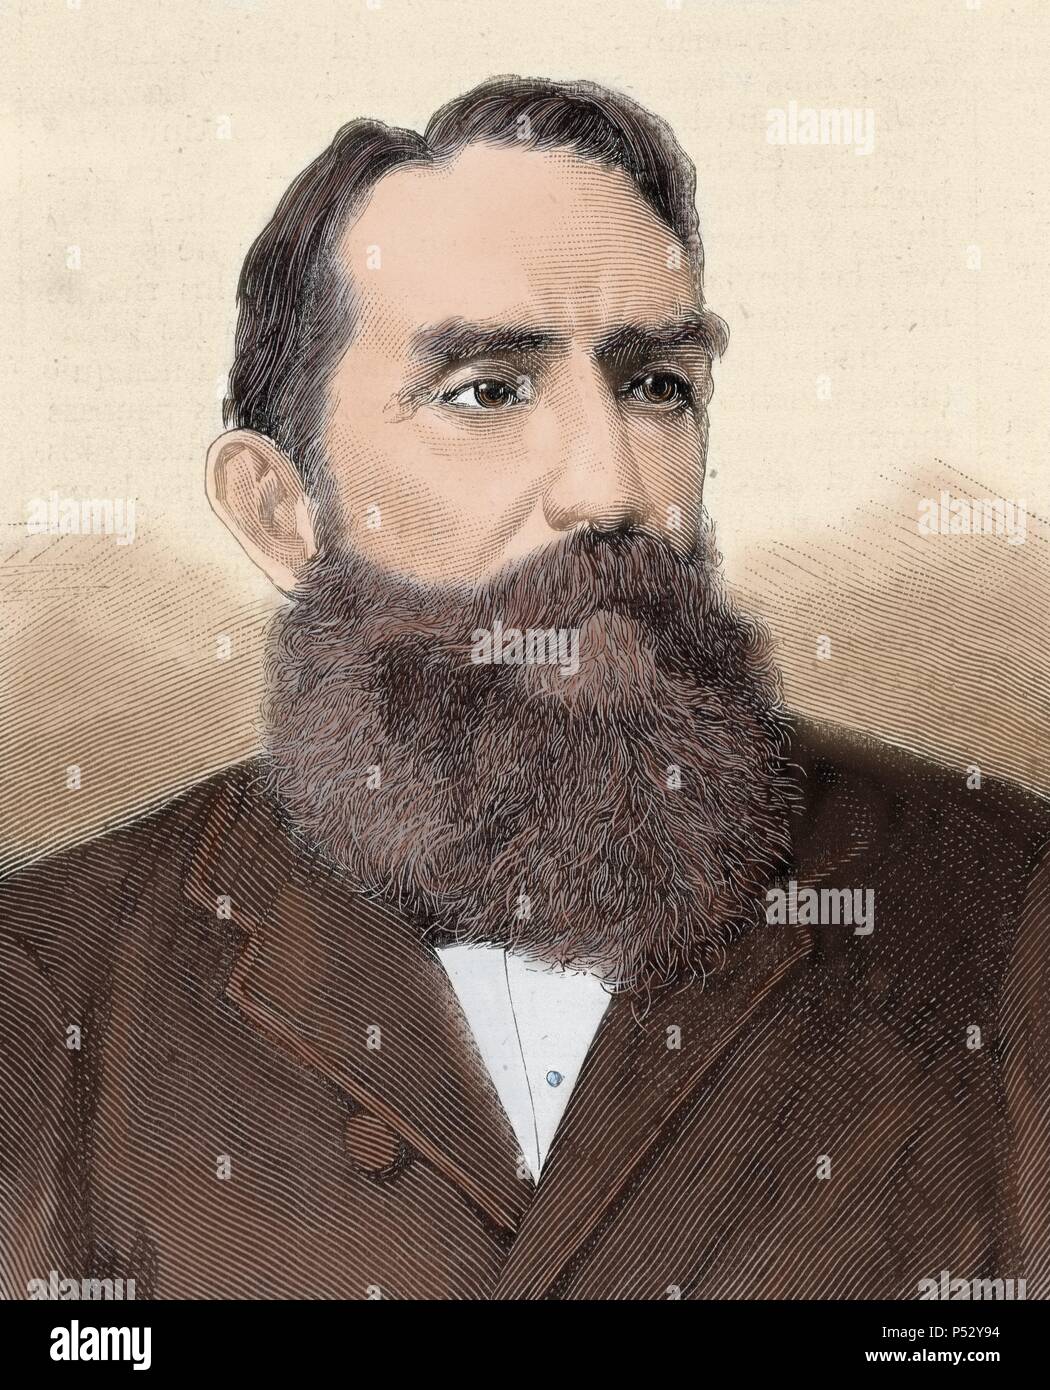 Rafael Nunez (1825-1894). Colombian author, lawyer, journalist and politician. Elected President of Colombia in 1880 and in 1884. Engraving by Carretero. Colored. Stock Photo